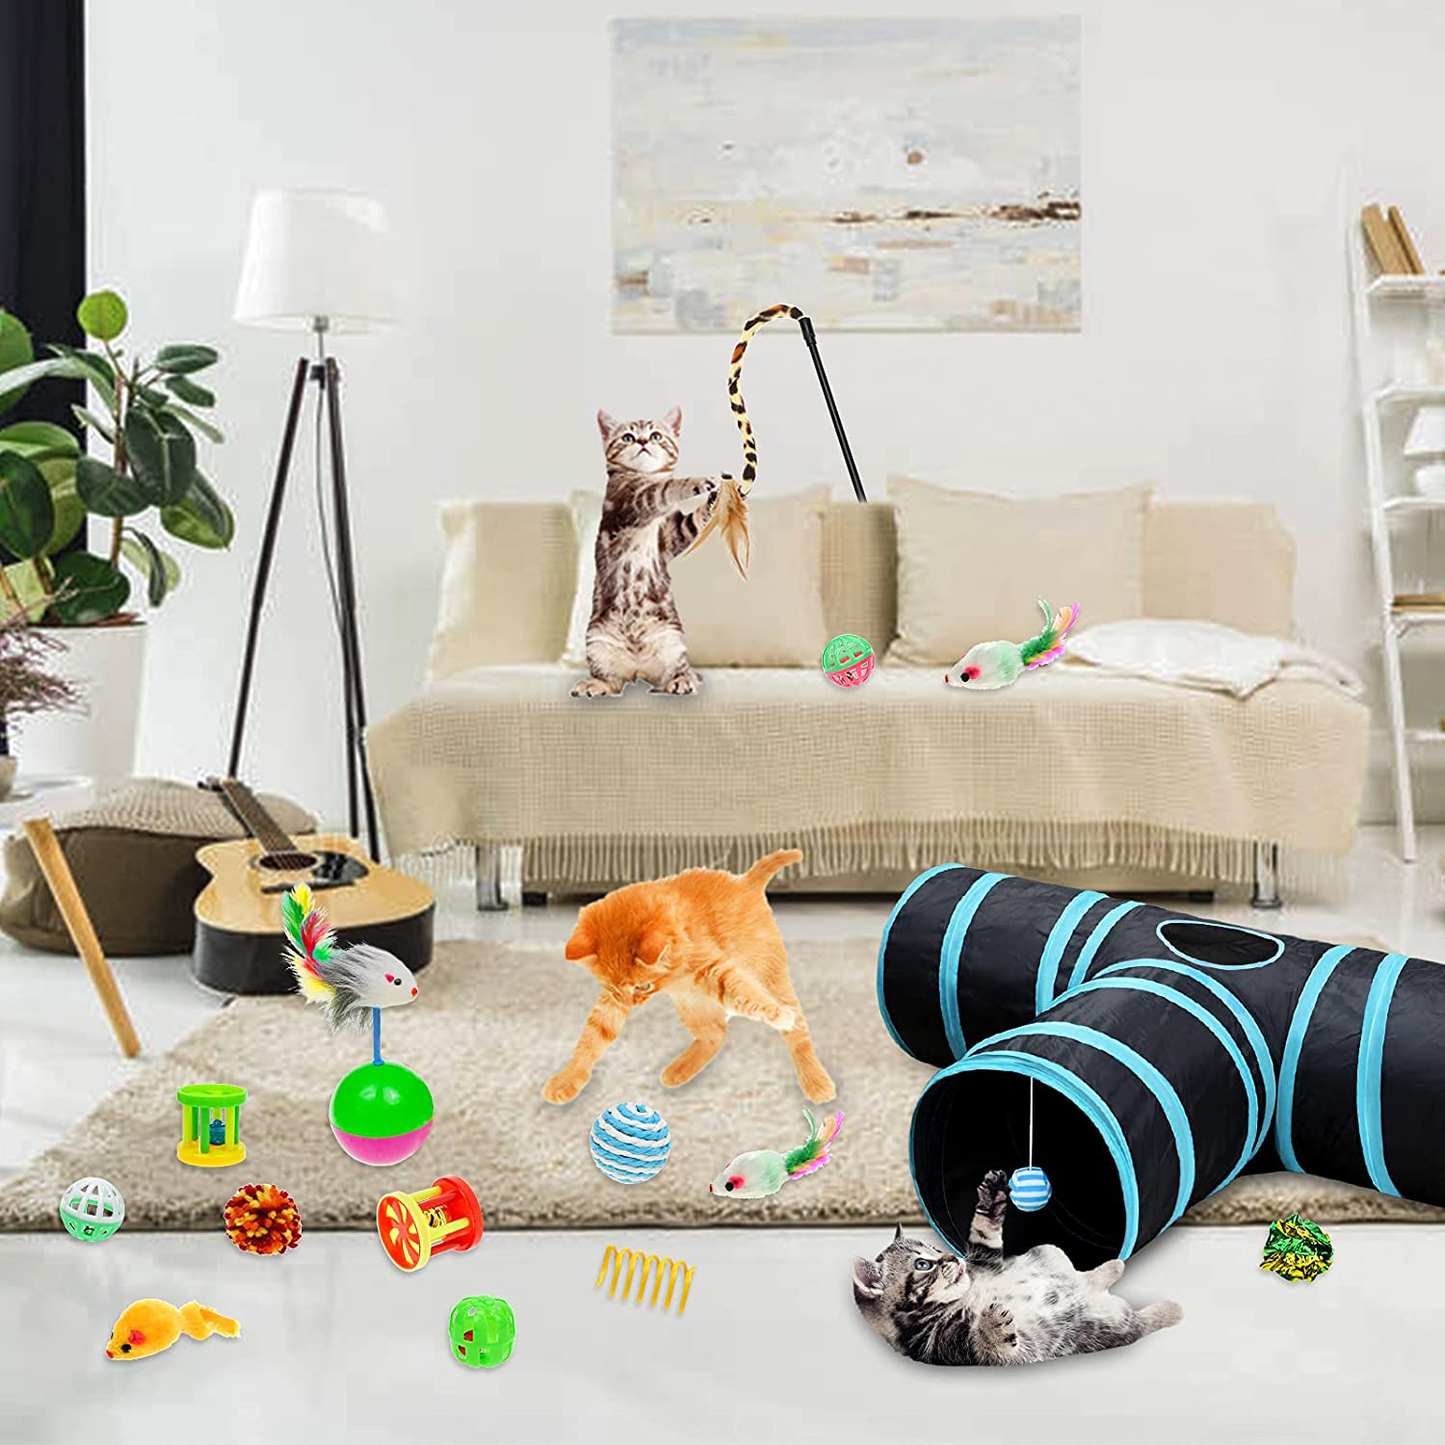 Malier 20 PCS Cat Kitten Toys Set, Collapsible Cat Tunnels for Indoor Cats, Interactive Cat Feather Toy Fluffy Mouse Crinkle Balls Cat 3 Way Tube Tunnel Toys for Cat Puppy Kitty Kitten